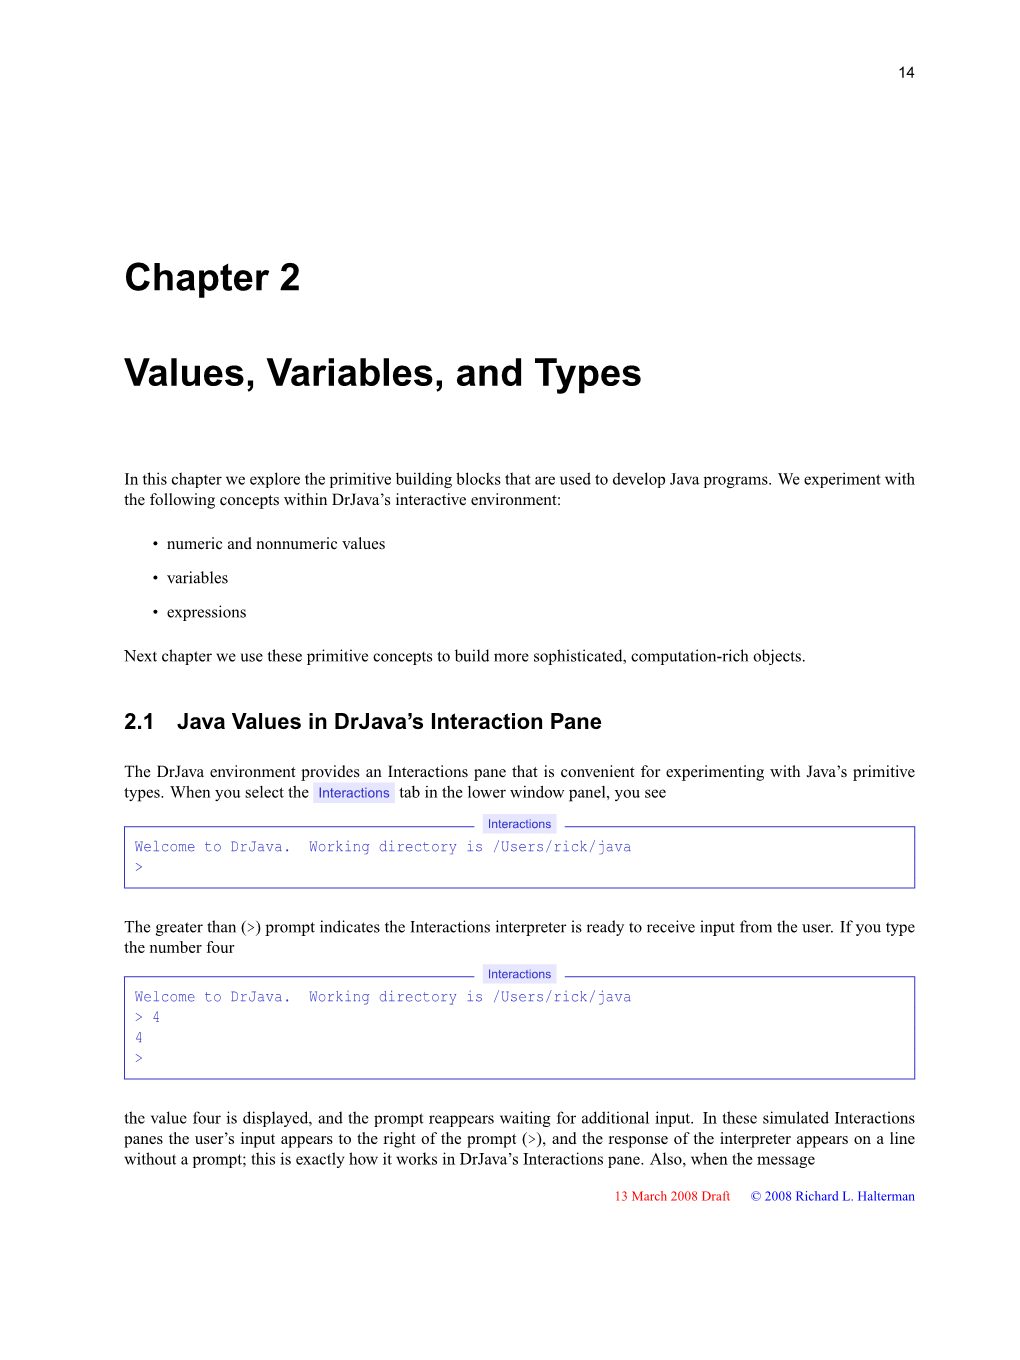 Chapter 2 Values, Variables, and Types